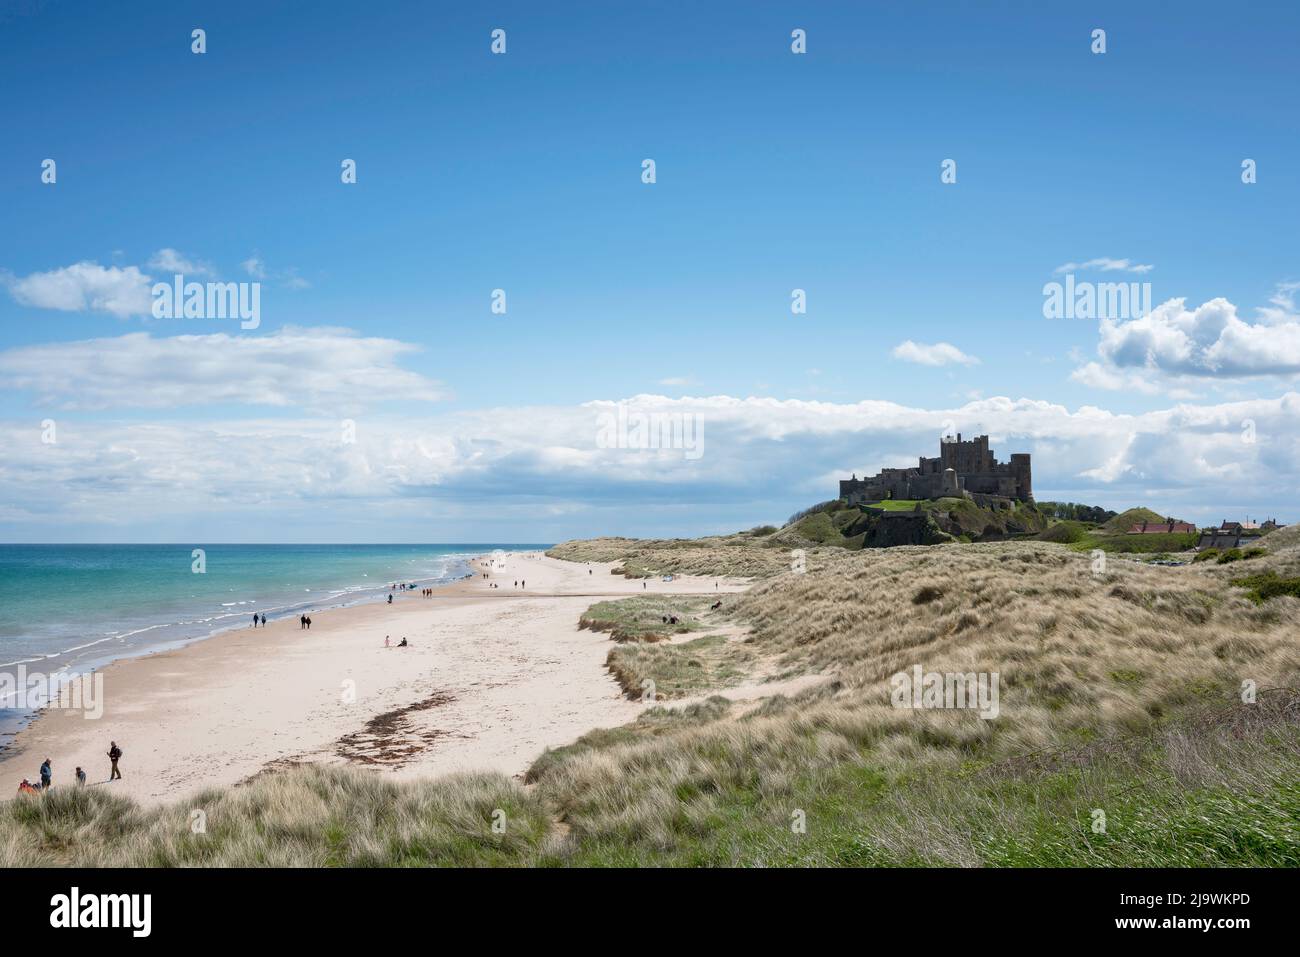 Bamburgh beach, view in late spring of Bamburgh Beach with Bamburgh Castle sited dramatically above the sand dunes, Northumberland, England, UK Stock Photo